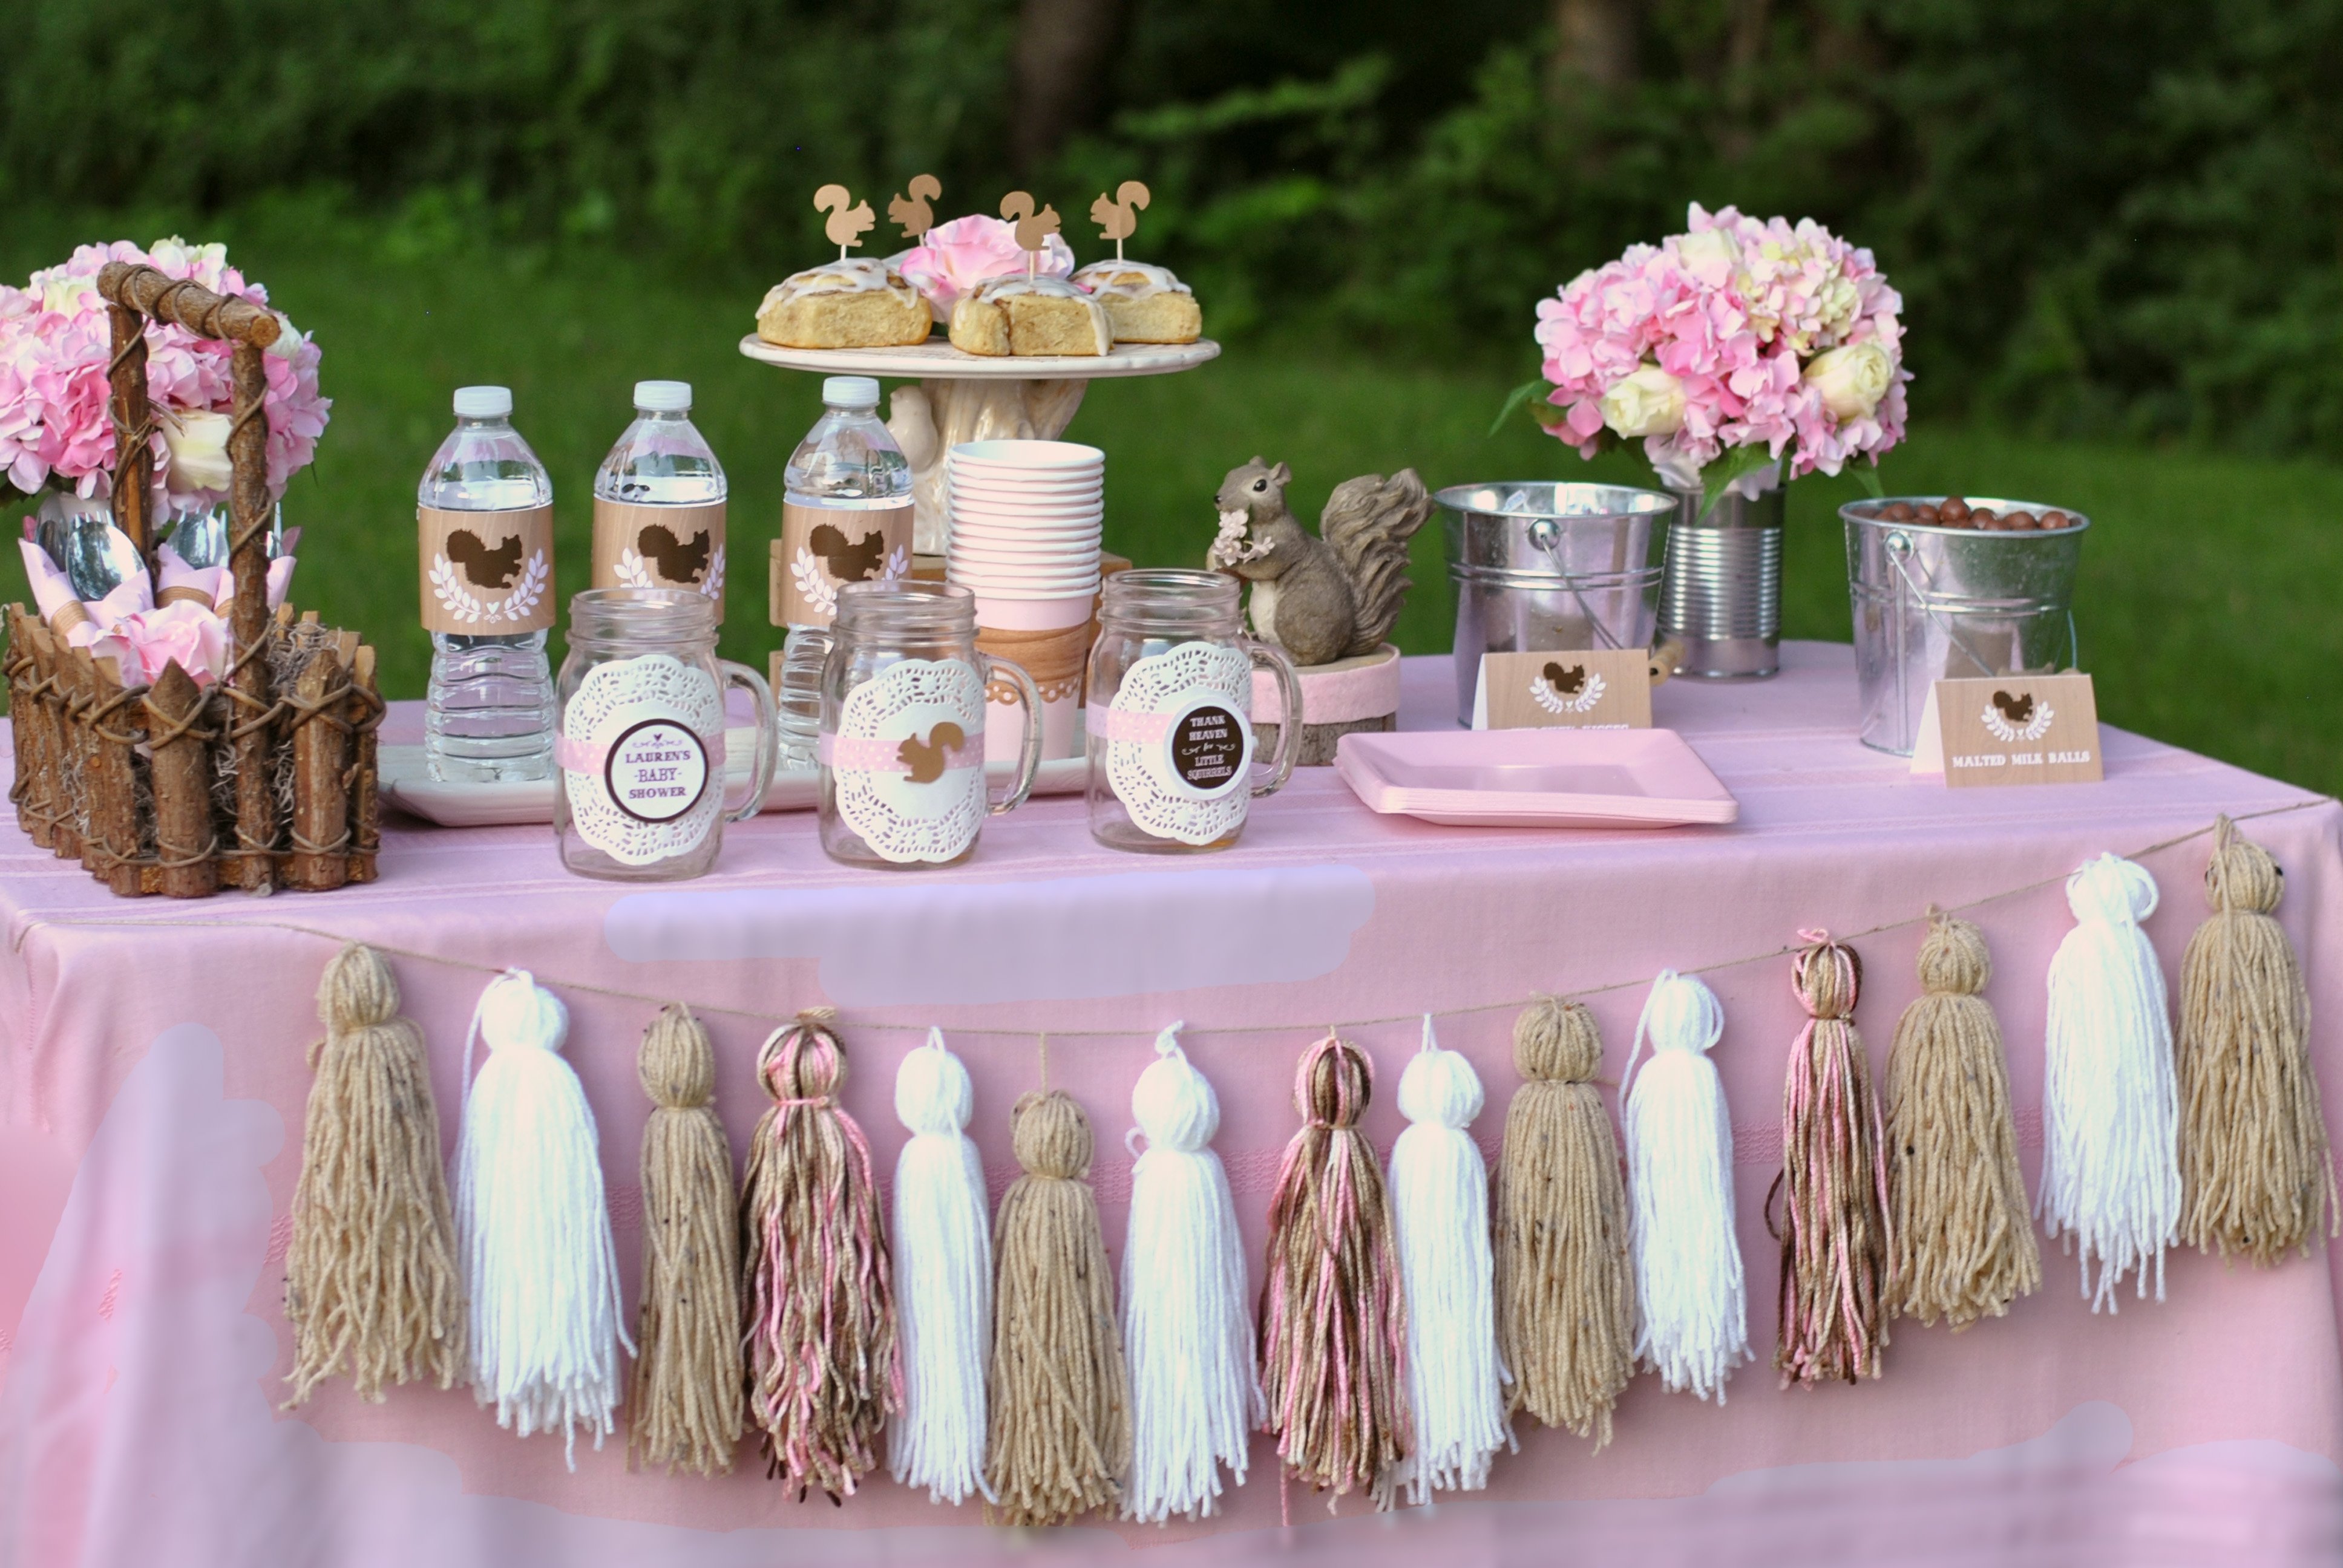 10 Fashionable Baby Girl Baby Shower Ideas baby shower theme ideas for girl omega center ideas for baby 8 2022